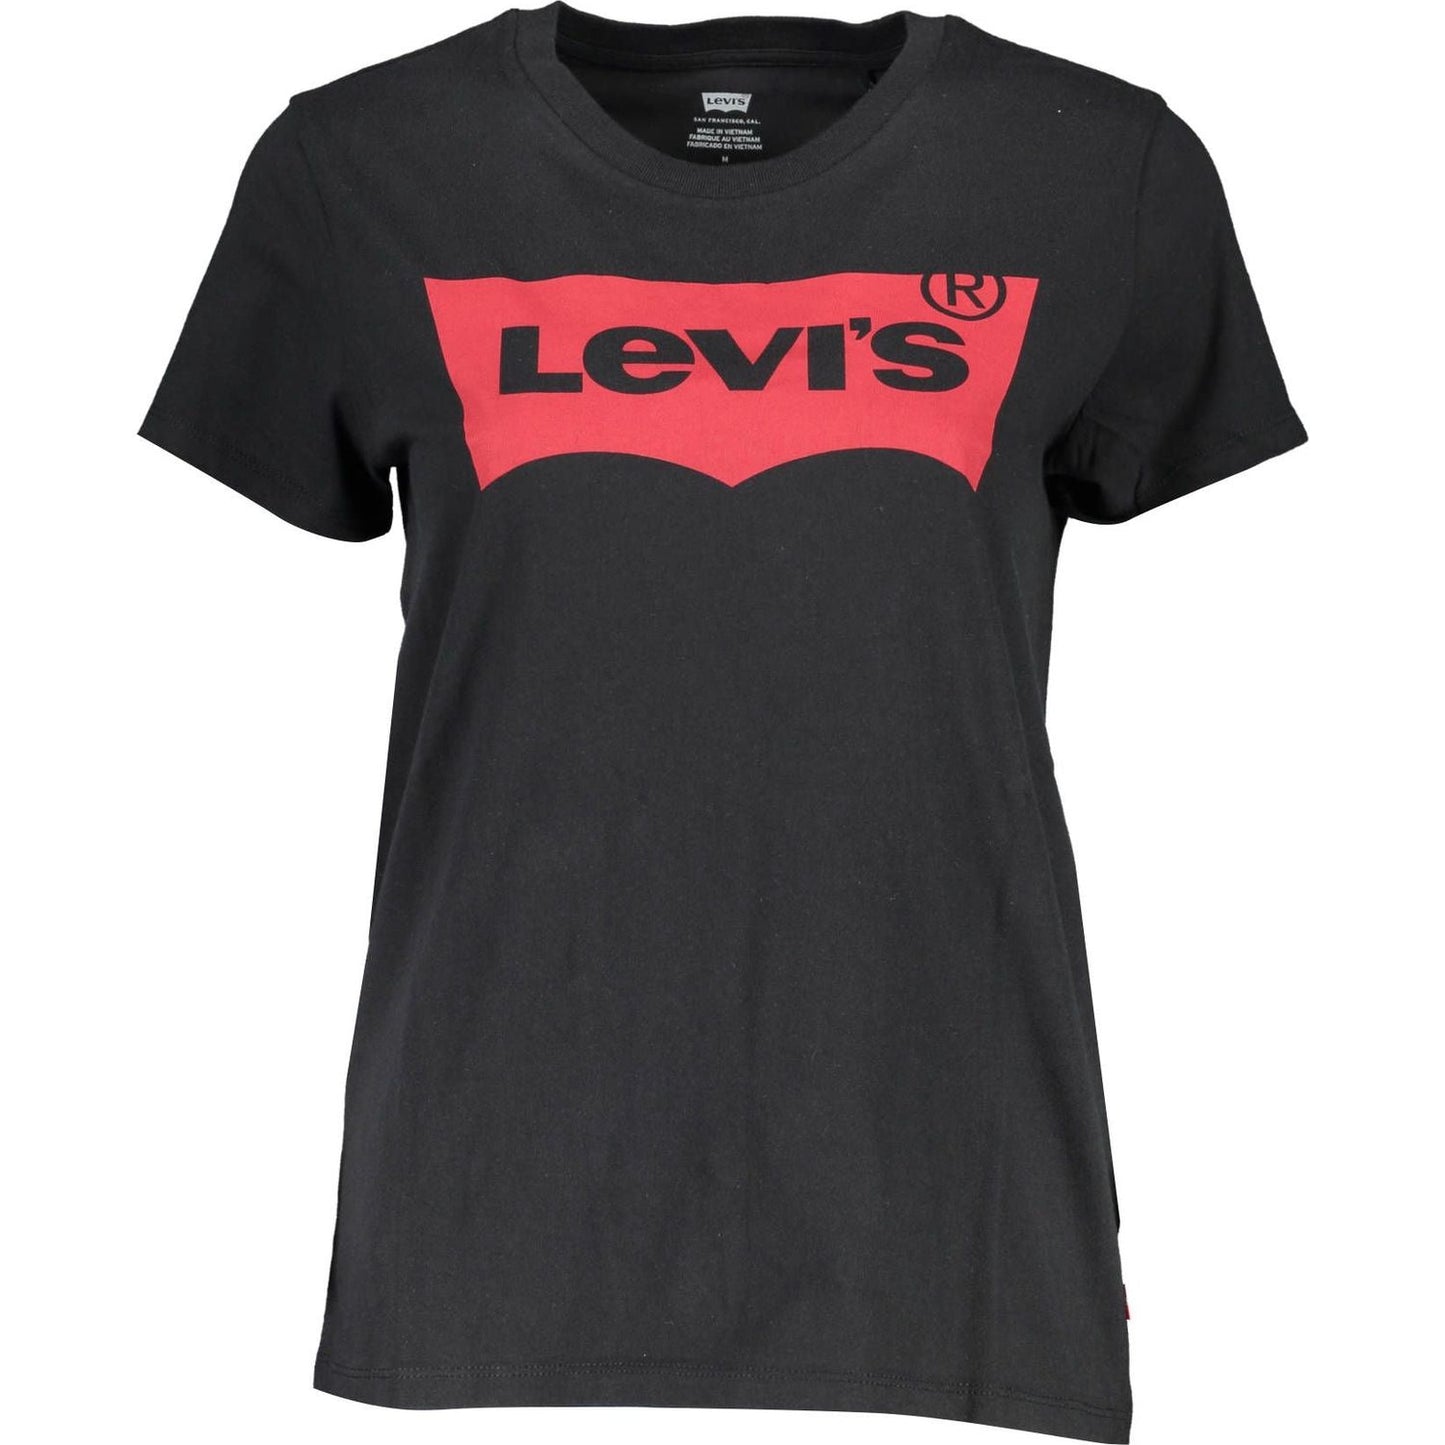 Levi's Chic Black Cotton Tee with Iconic Print chic-black-cotton-tee-with-iconic-print